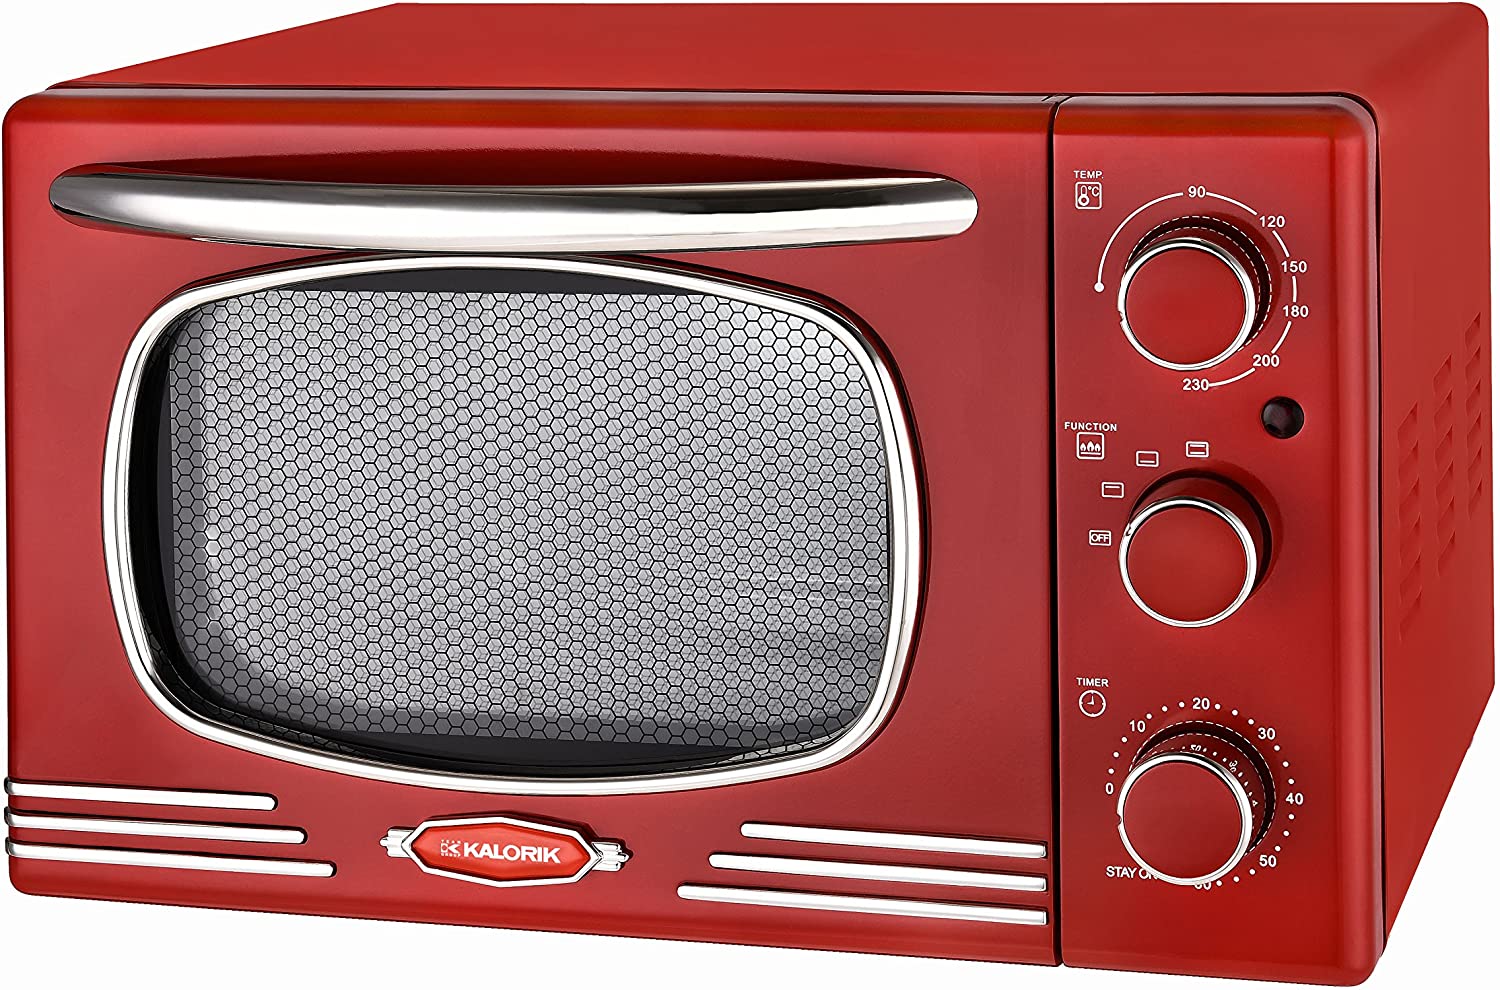 Team Kalorik TKG OT 2500 R Retro Oven 19.5 Litre Capacity with Removable Aid, Baking Tray and Cooking Rack (0-230°C), 1300 W, Metal / Glass, Red